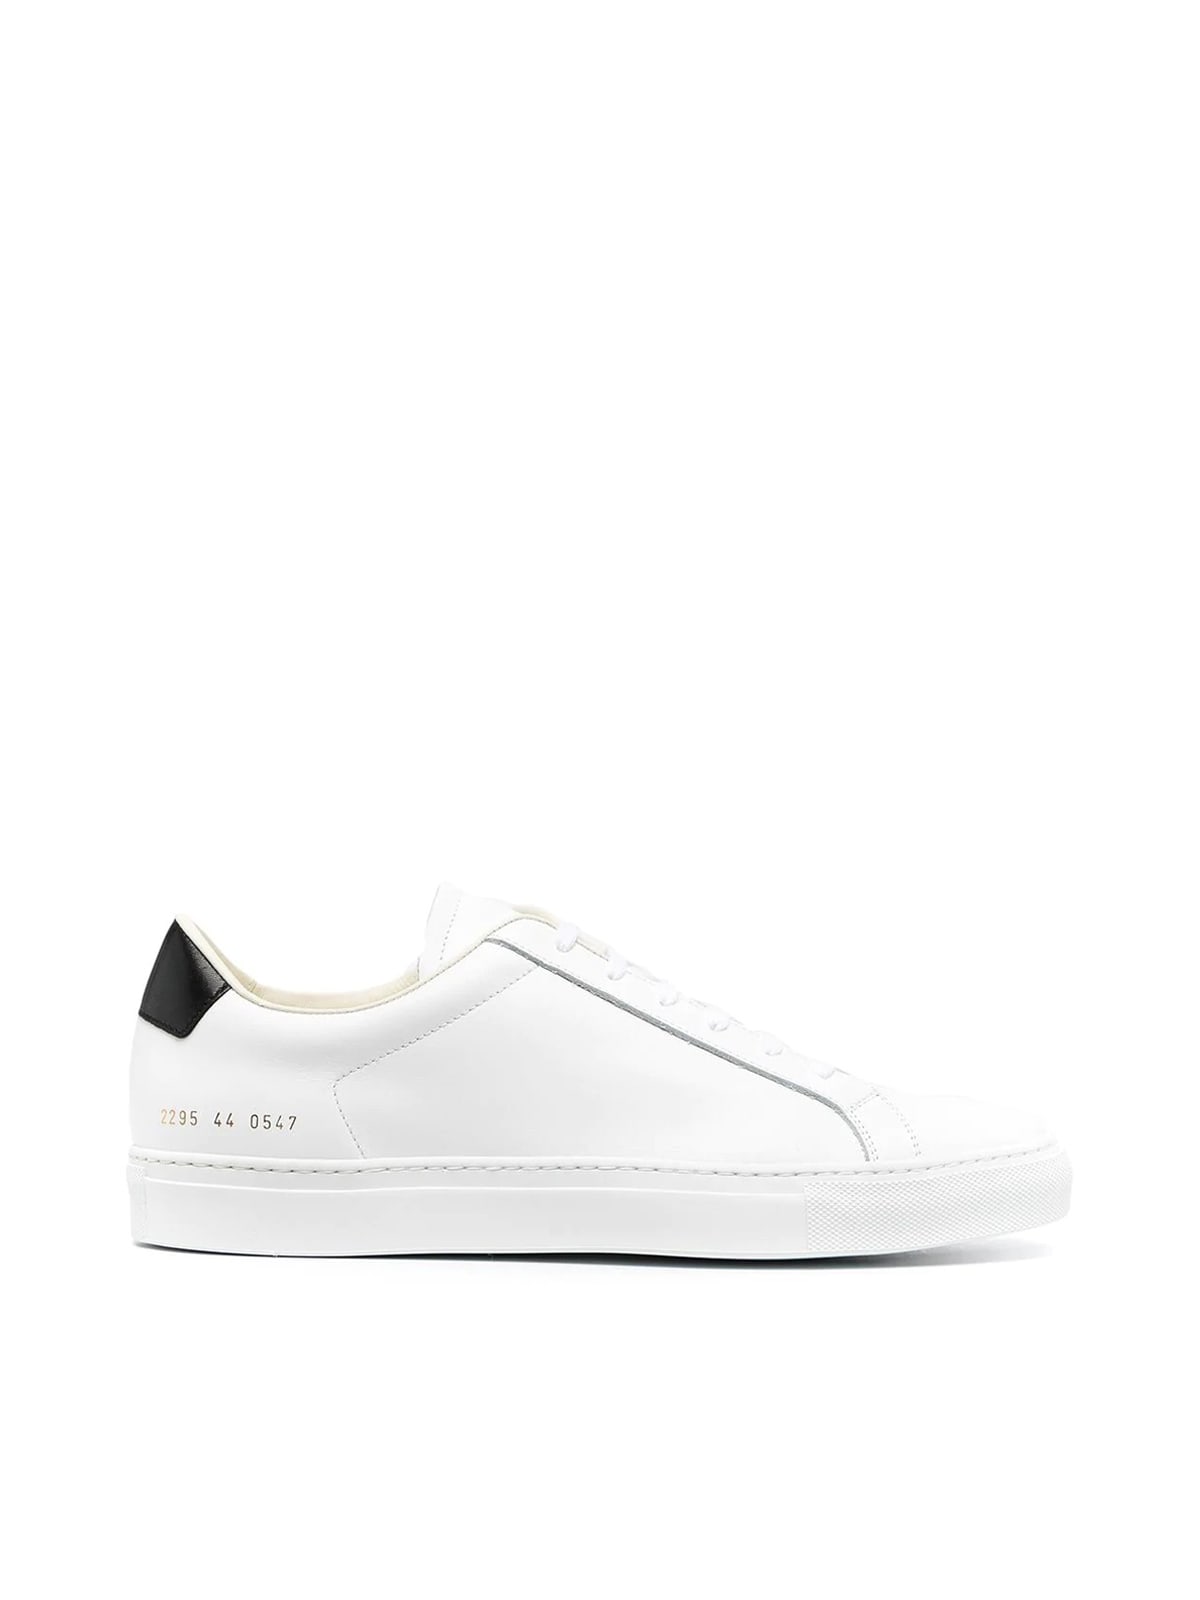 Common Projects Retro Low 2295